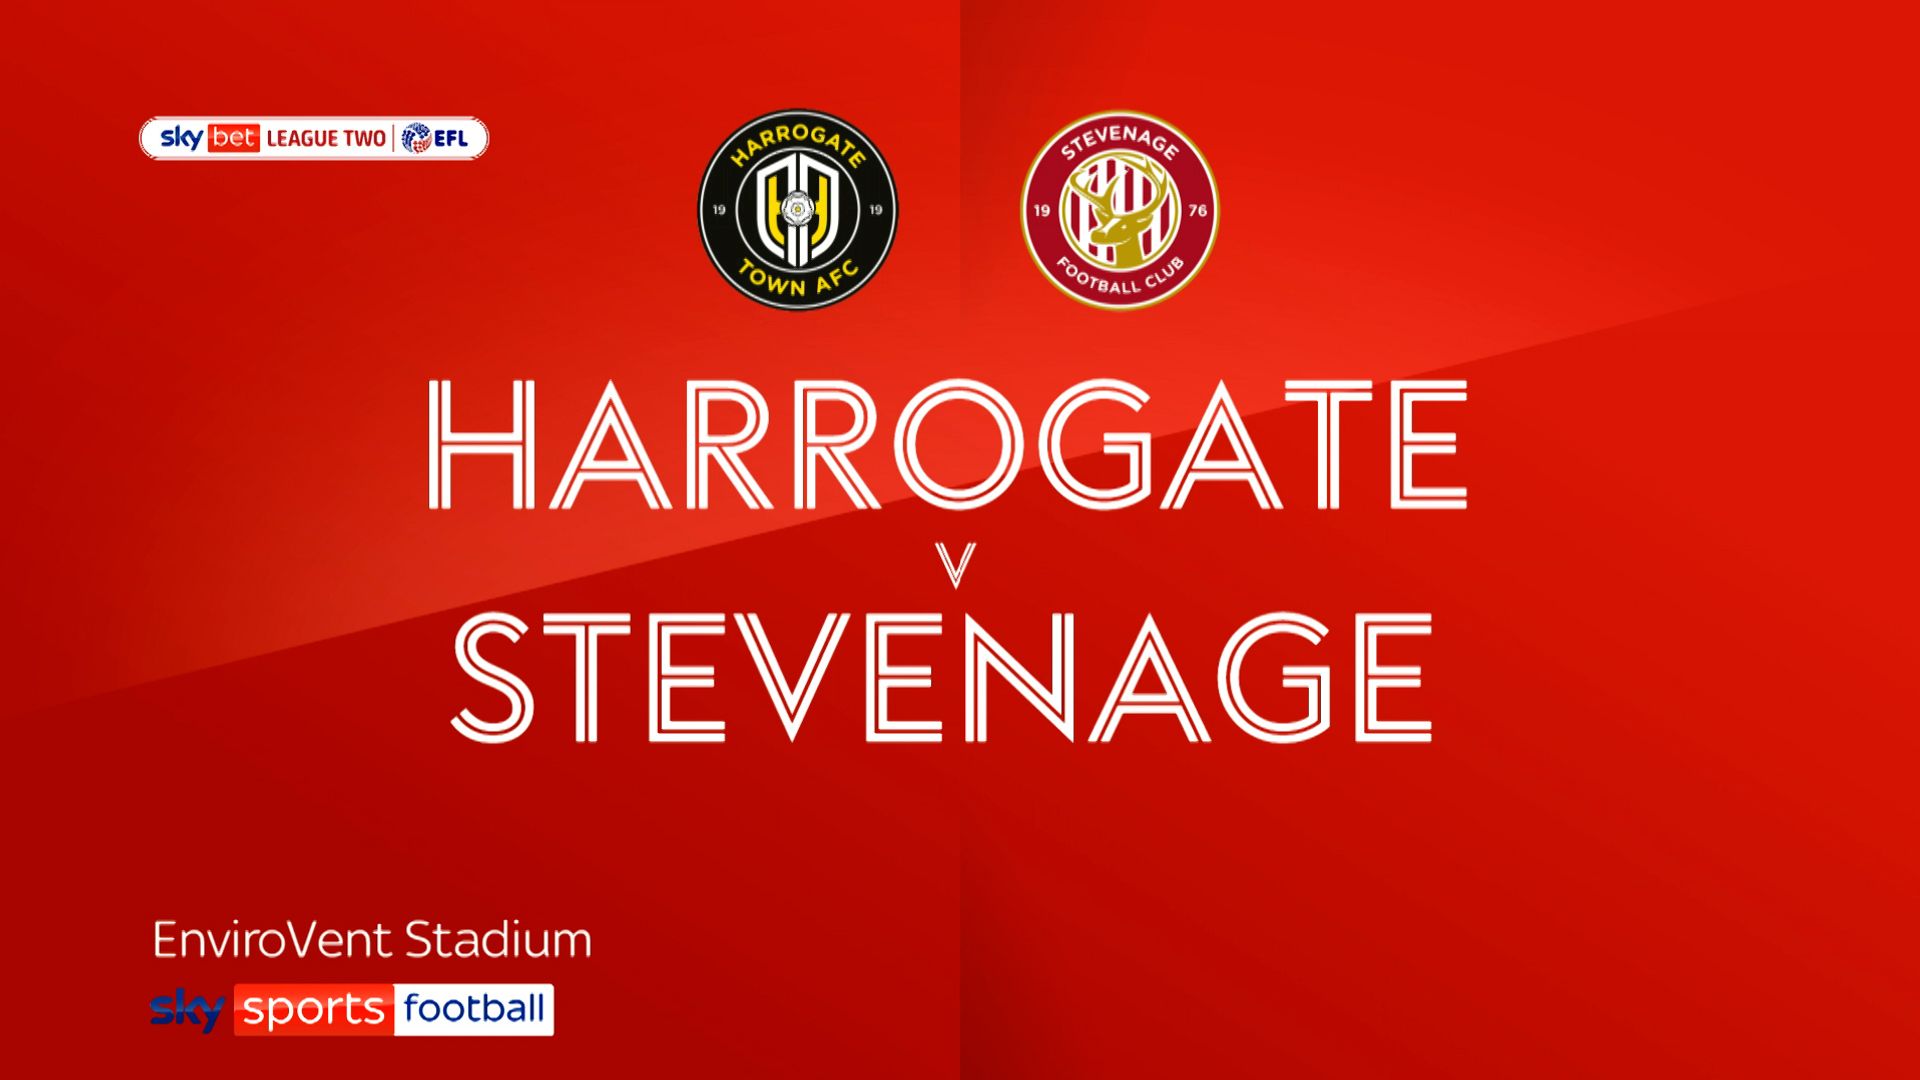 Harrogate 1-1 Stevenage: Boro extend unbeaten run to 10 games after stalemate with Town